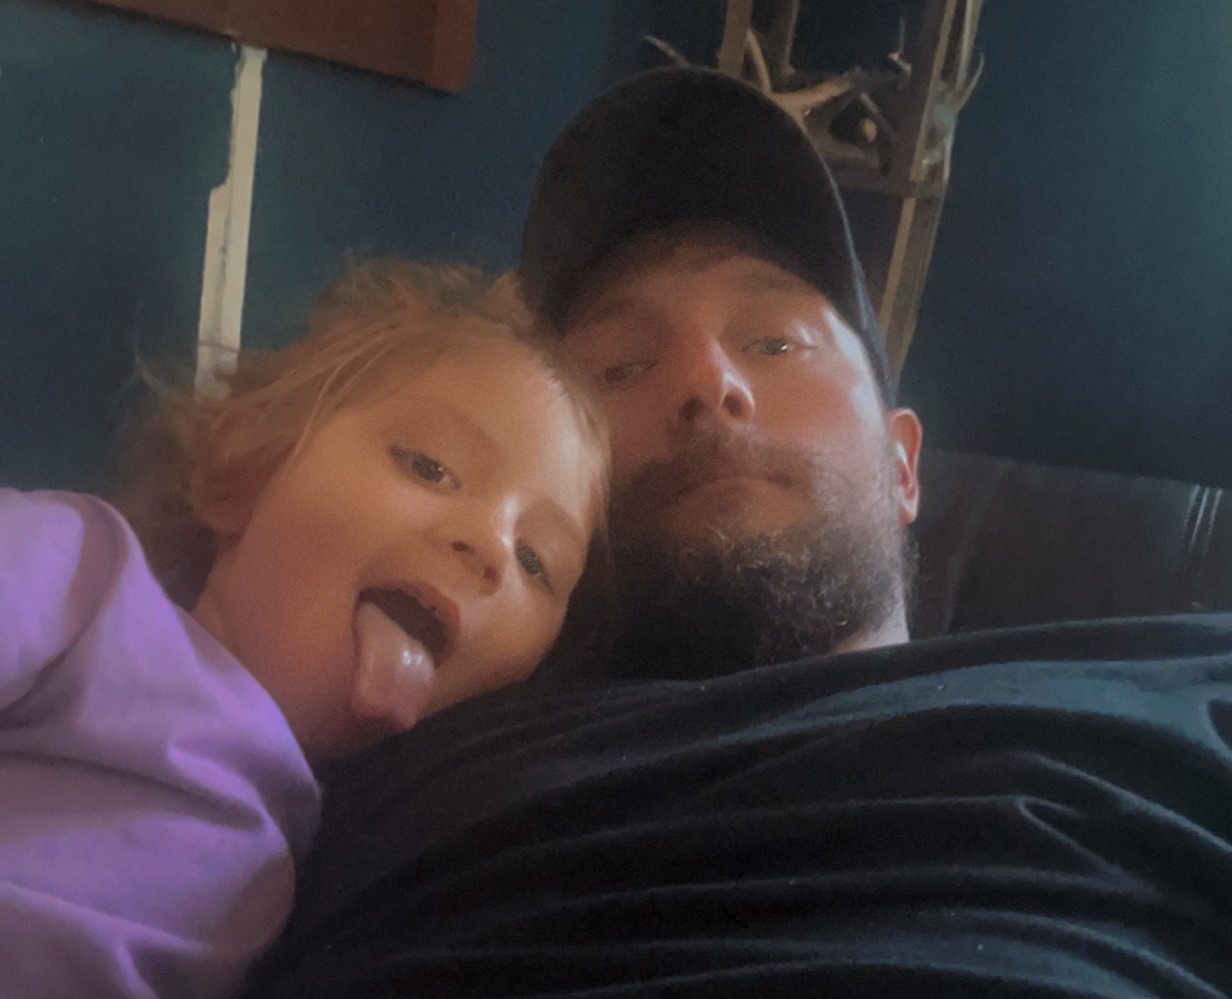 Kevin and his young daughter take a selfie. She is making a silly face.